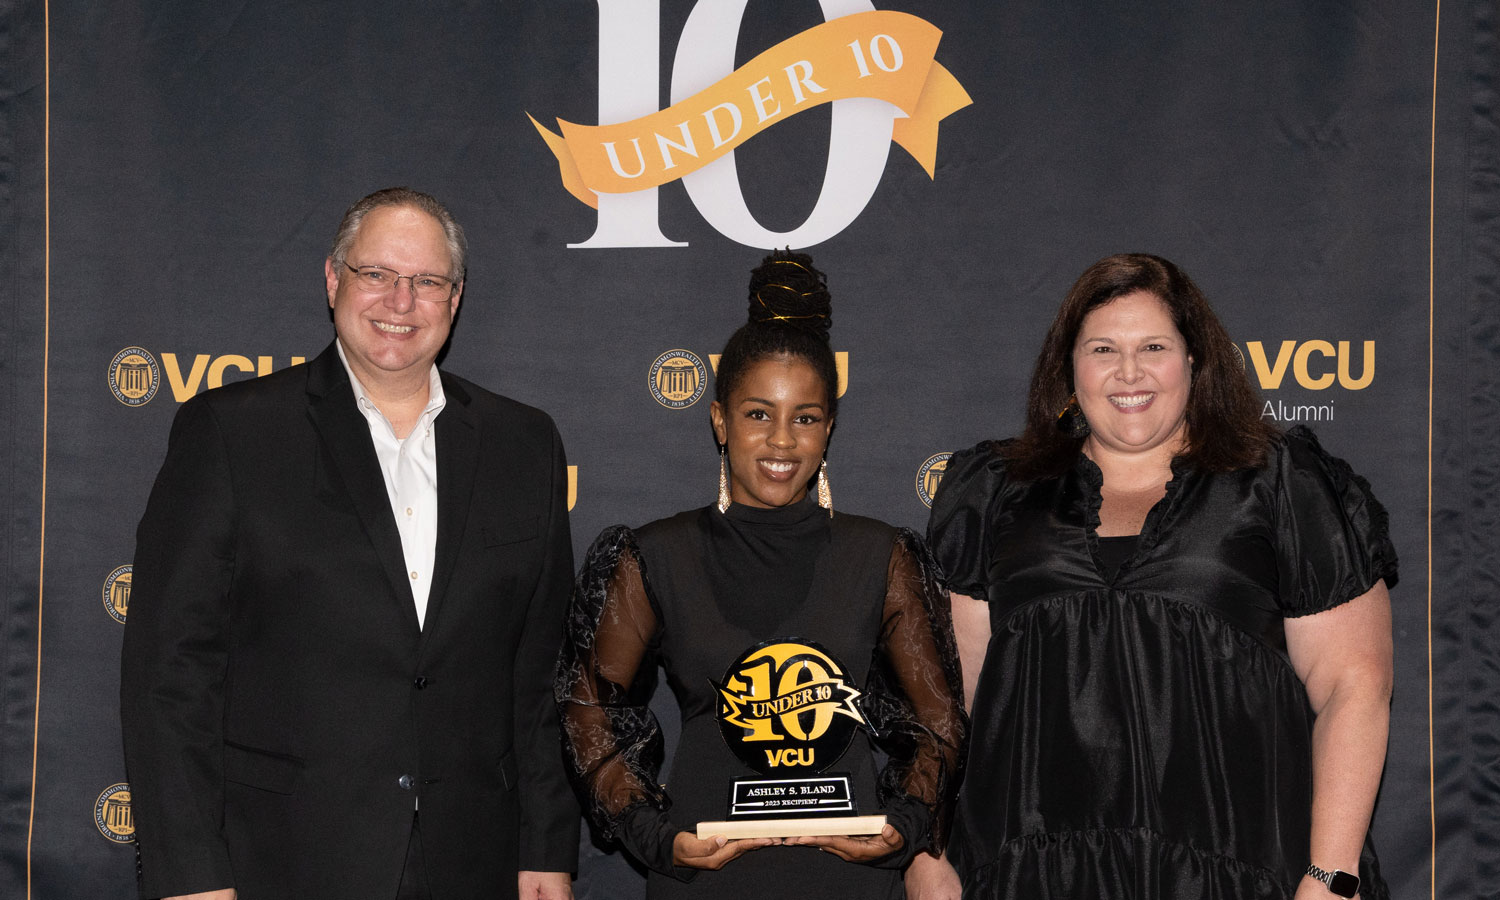 Ashley Bland (middle) is presented with VCU Alumni’s 10 Under 10 award by Jay Davenport, vice president of development and alumni relations, (left) and Elizabeth Bass, associate vice president for alumni relations (right).